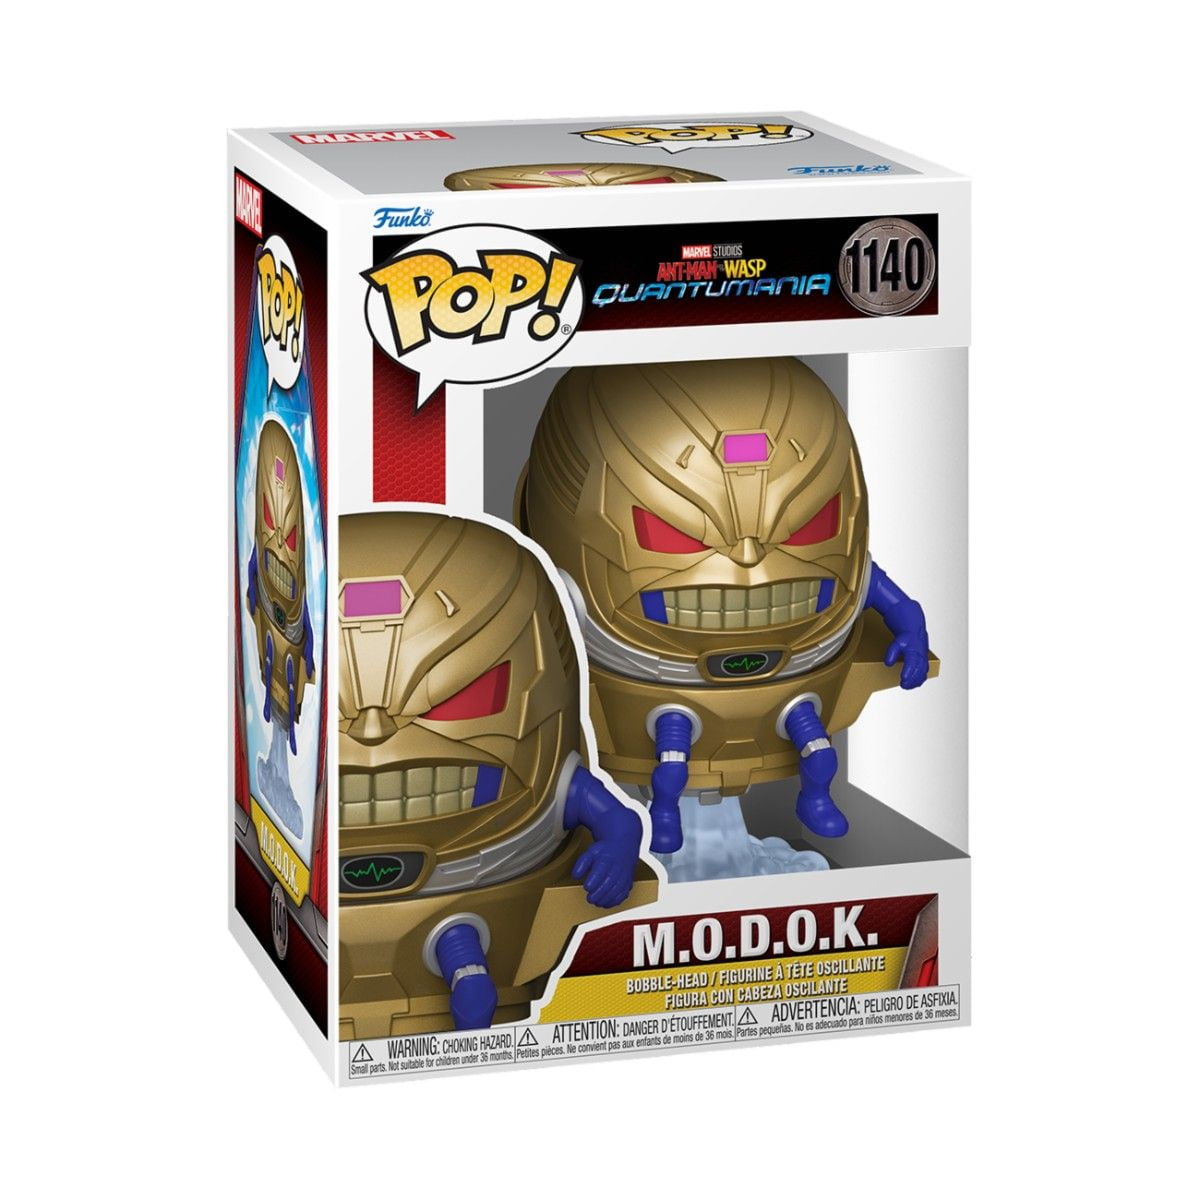 M.O.D.O.K. - Ant-Man and the Wasp: Quantumania - Funko POP! Vinyl (1140)